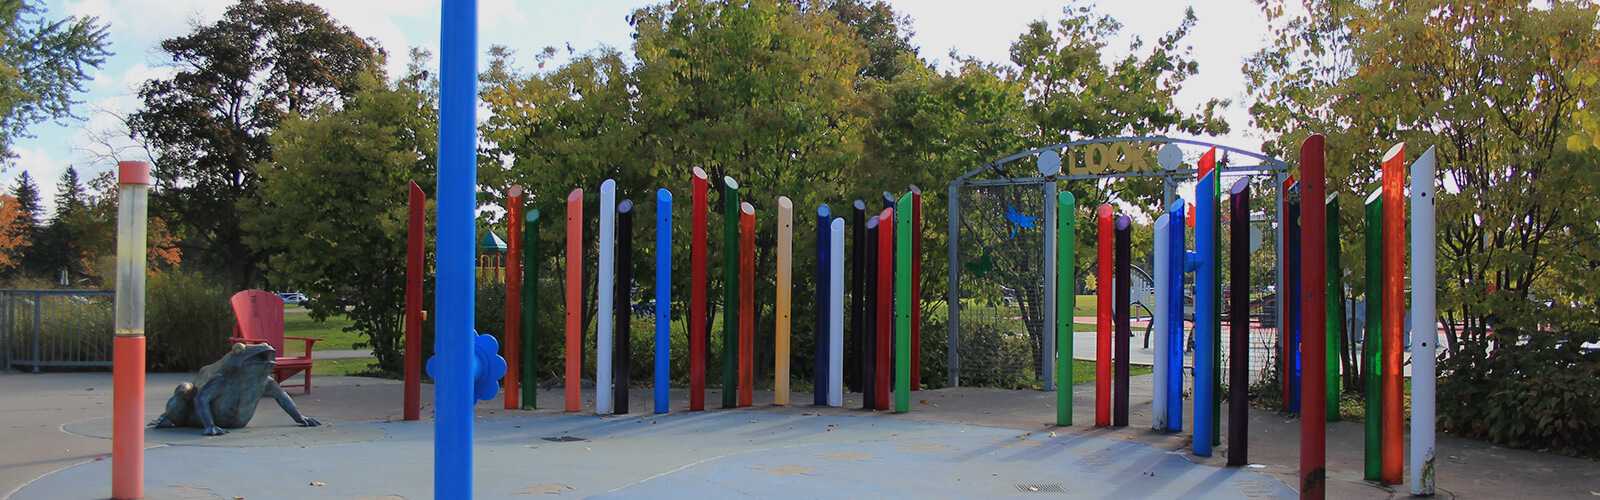 Colourful pillars surround a dry blue circular splash pad. To the left is a large sculpture of a frog, and behind that a red Muskoka chair. Behind the colourful pillars is a line of tall lush trees.